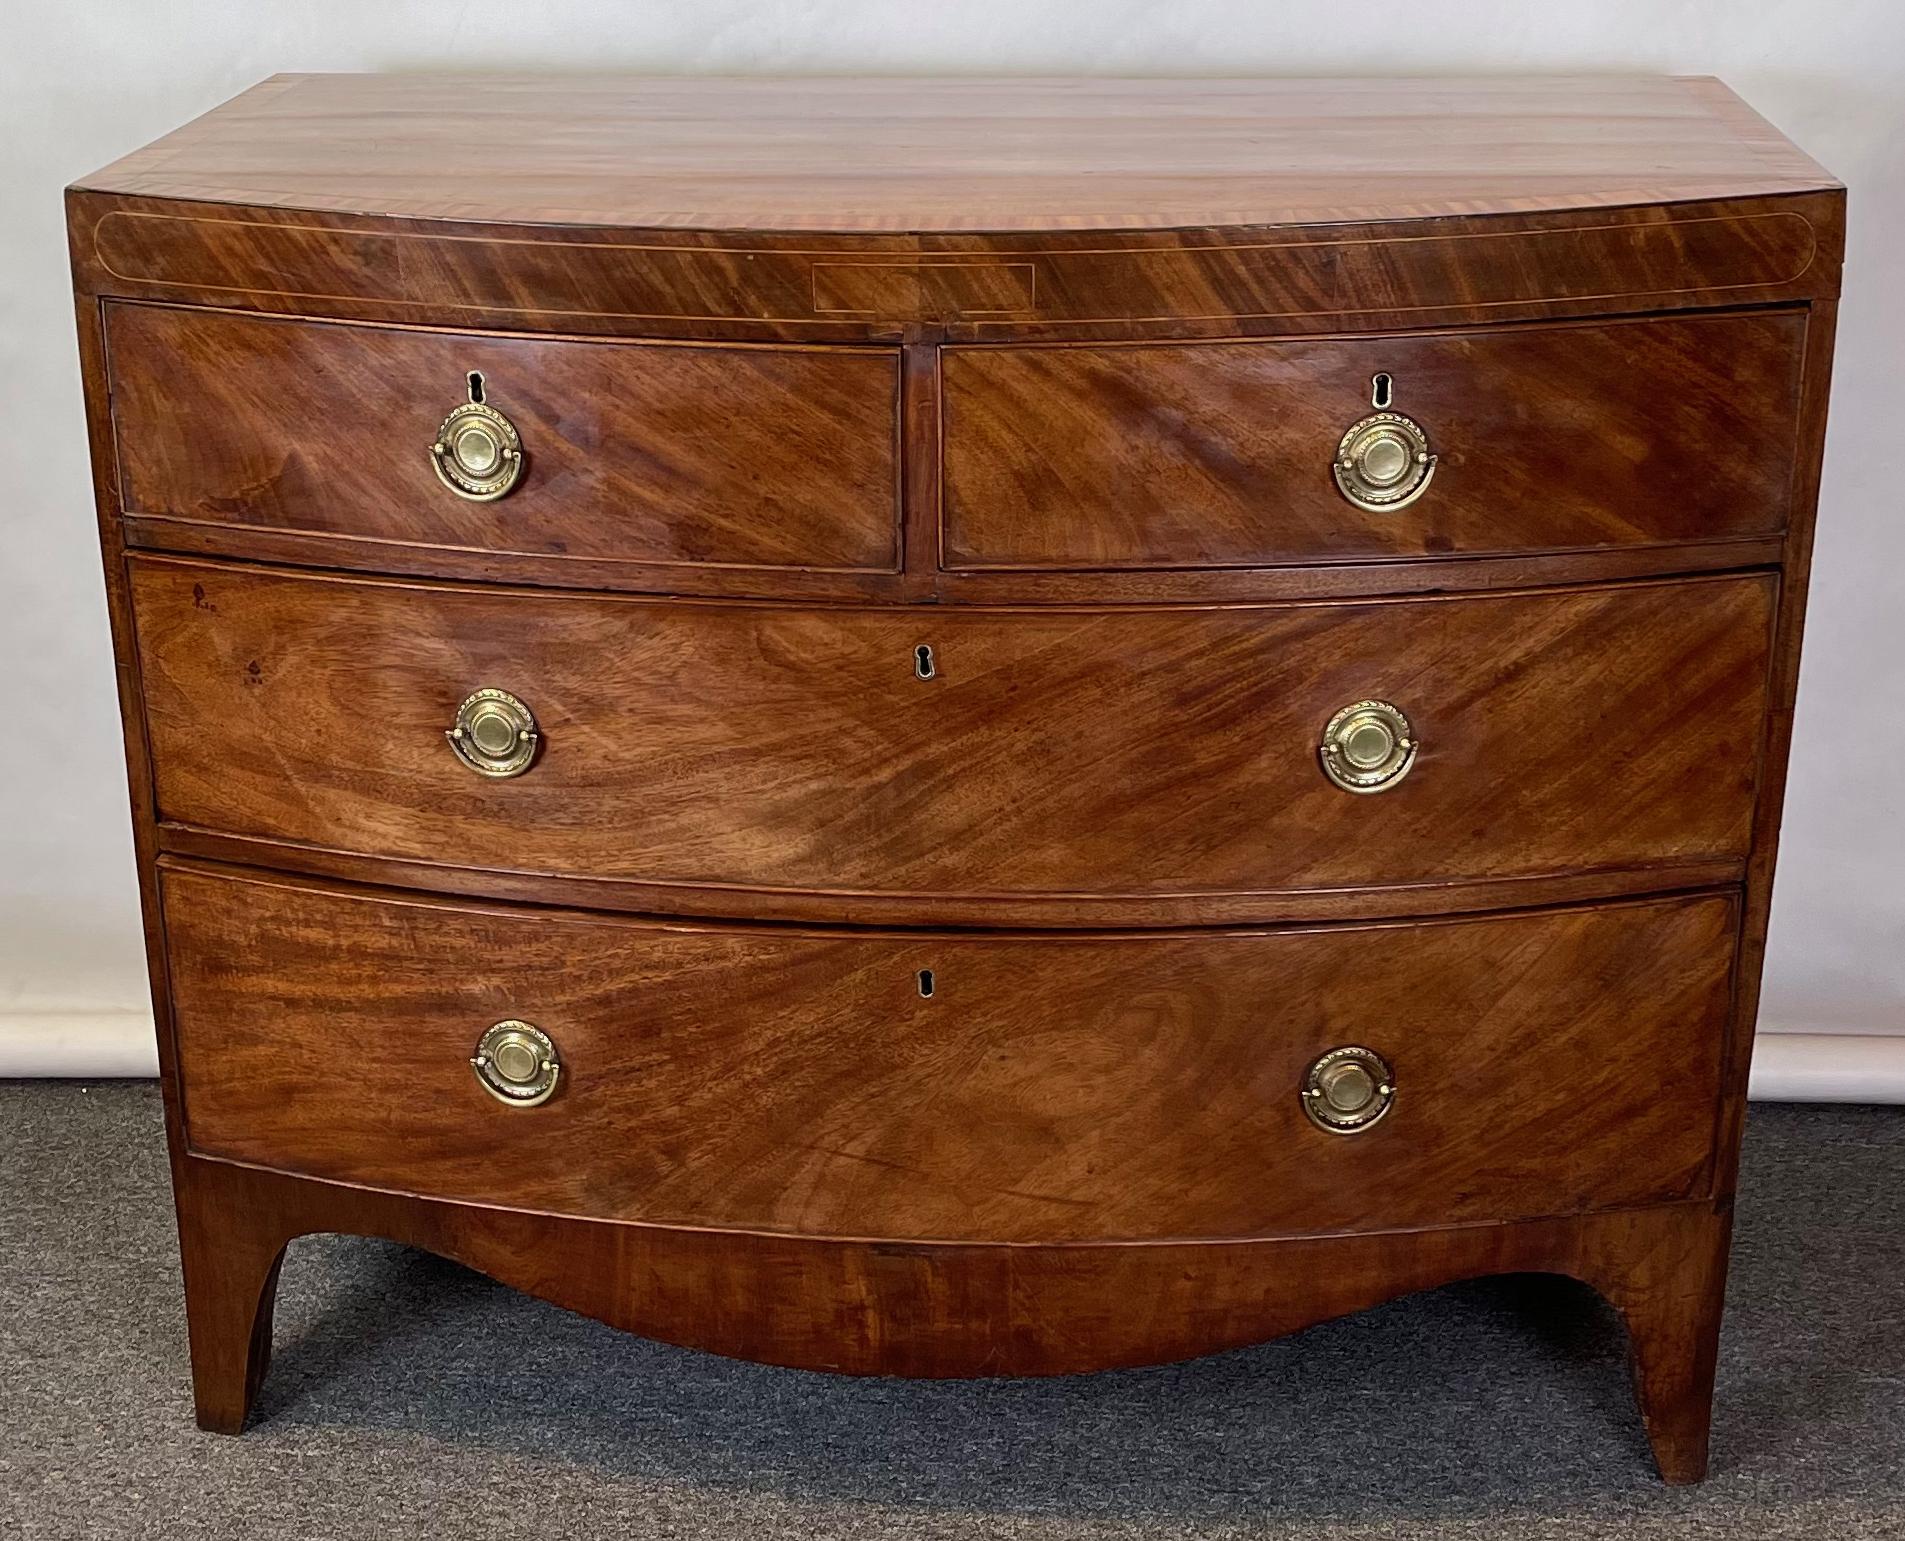 A small and elegant early 19th century George III bow front chest in faded mahogany and boxwood stringing with two small drawers over two graduated long drawers on splayed French feet.